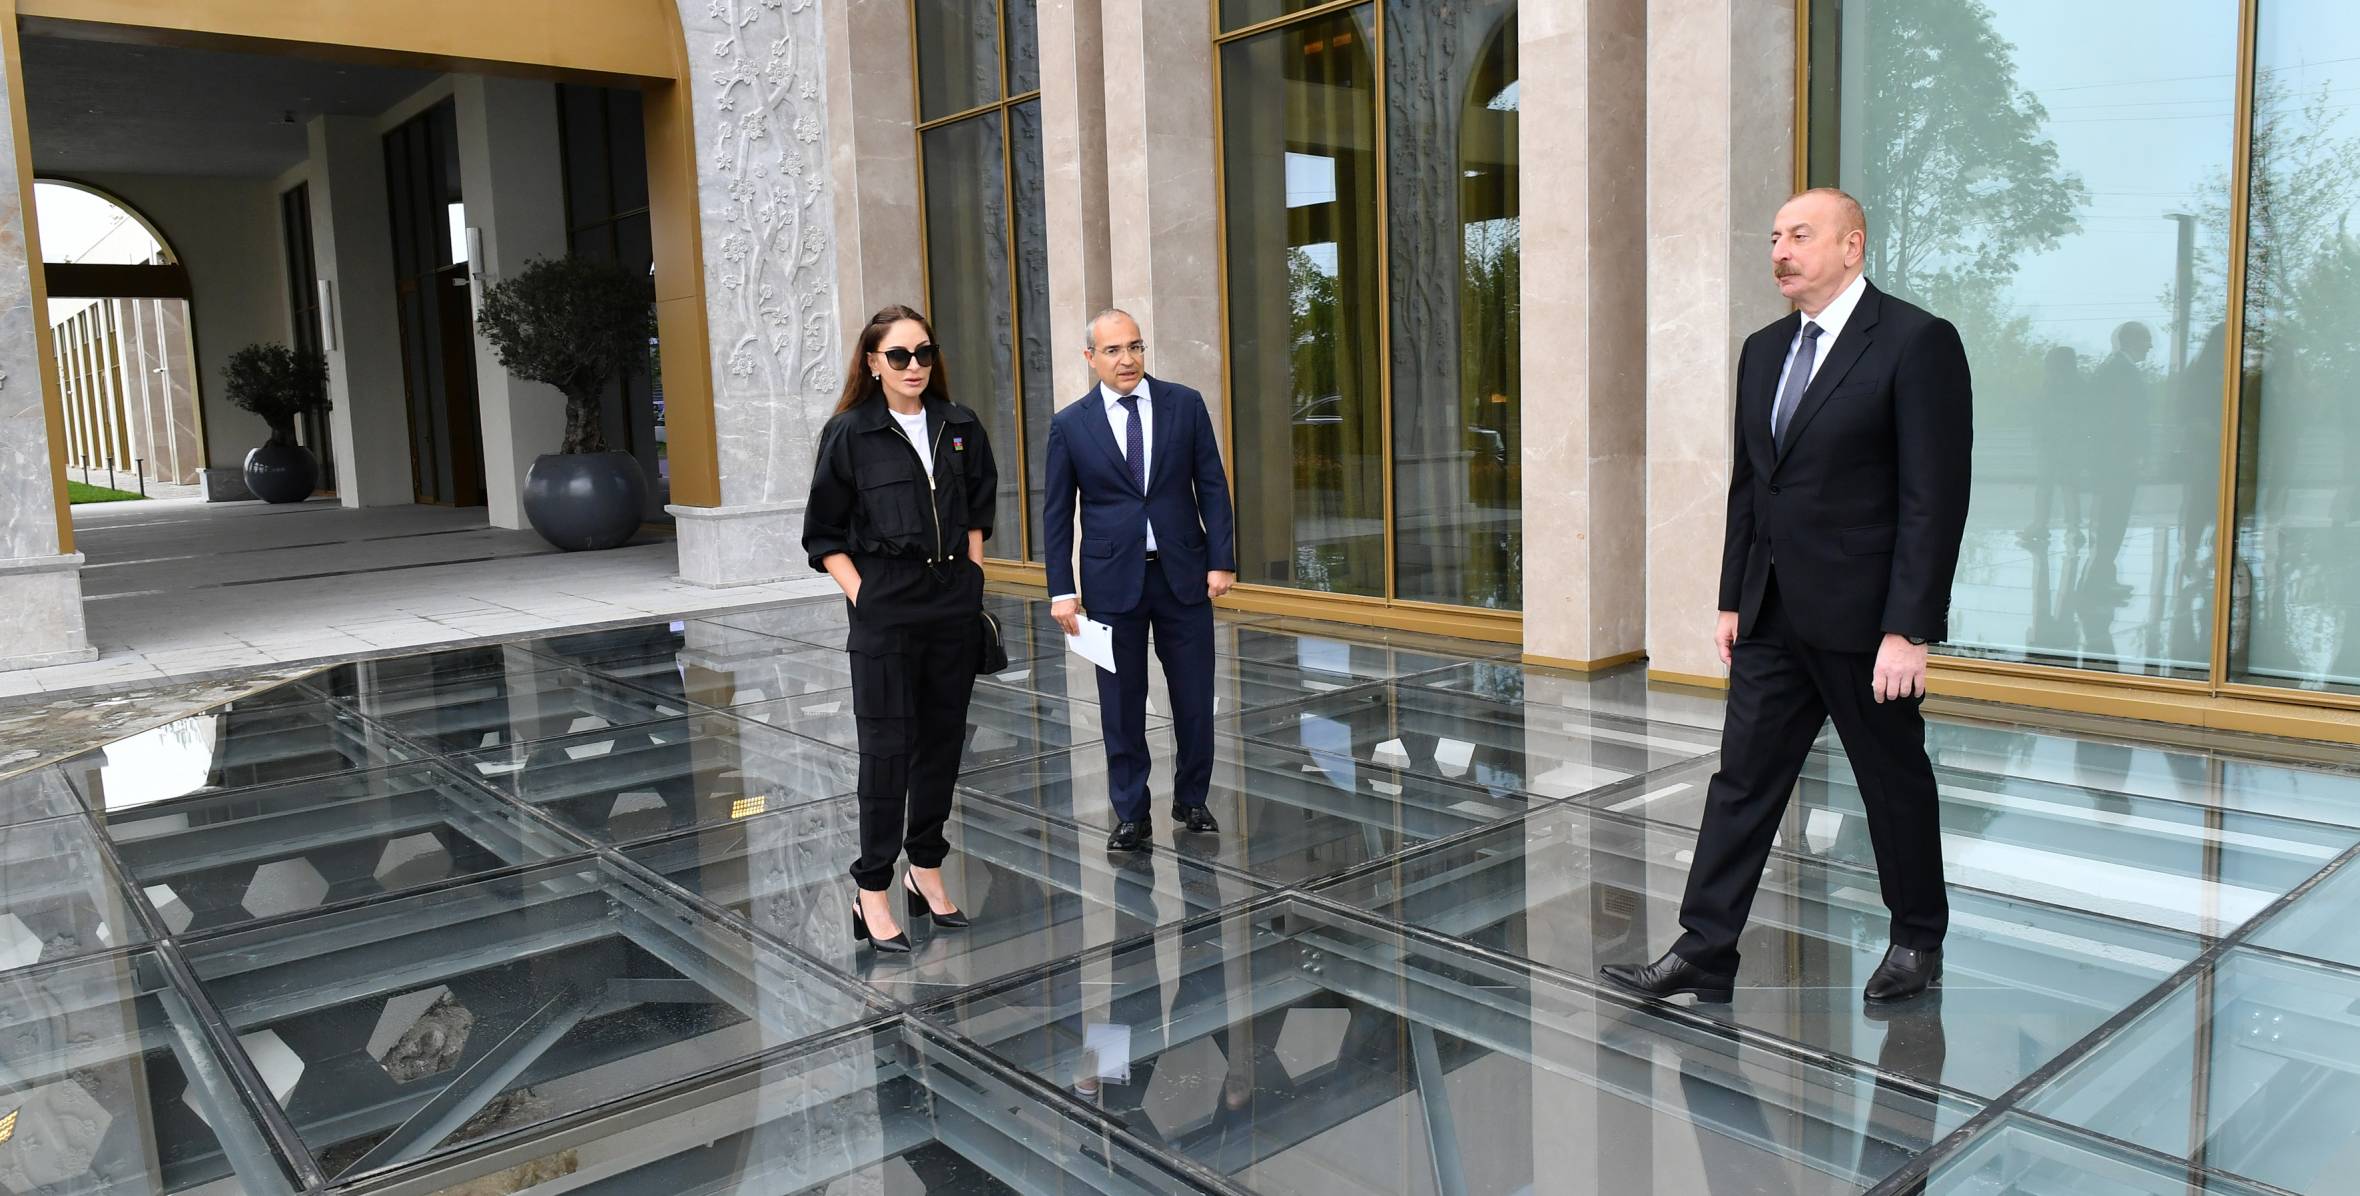 Ilham Aliyev, First Lady Mehriban Aliyeva and their family members have attended the opening of the Shusha Hotel-Congress Central Complex